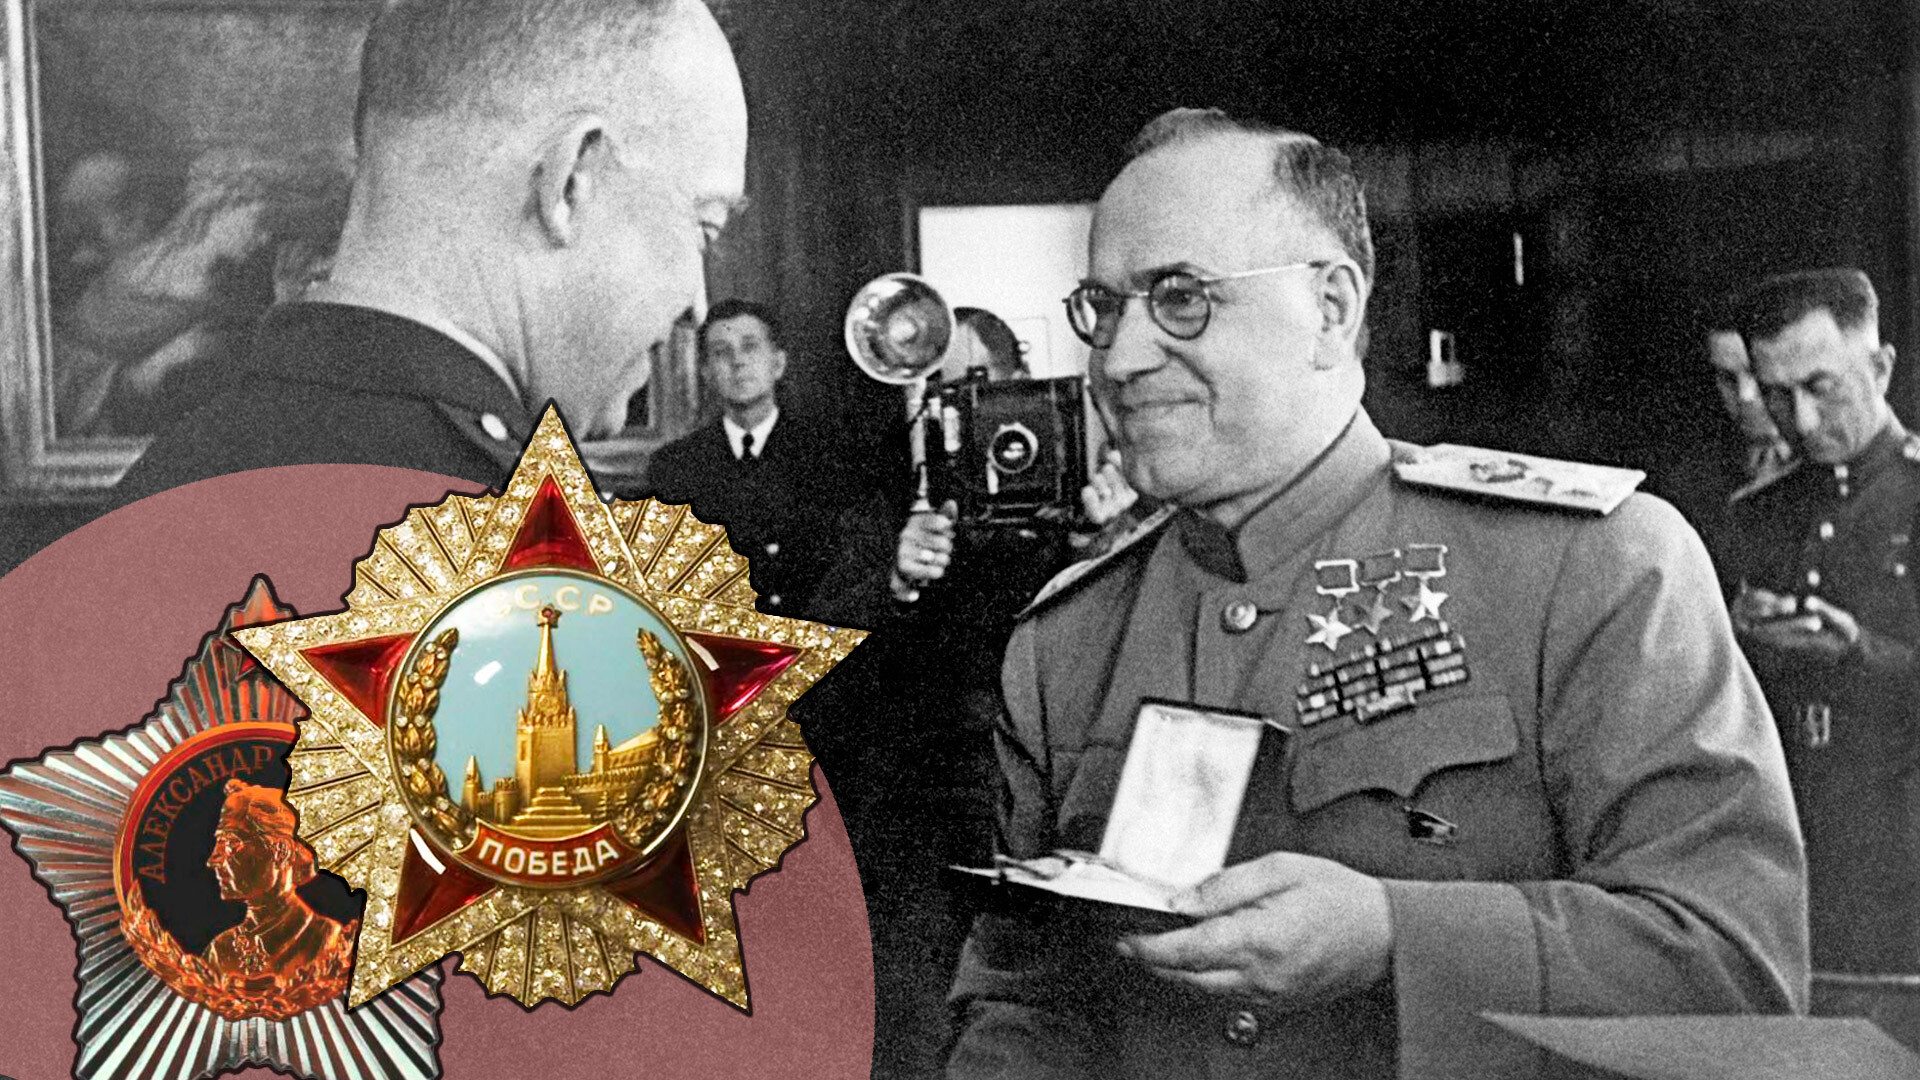 Marshal of the Soviet Union Georgy Zhukov presents Order of Victory to Army General Dwight David Eisenhower at Supreme Headquarters Allied Expeditionary Force in Frankfurt-am-Main, June 1945.